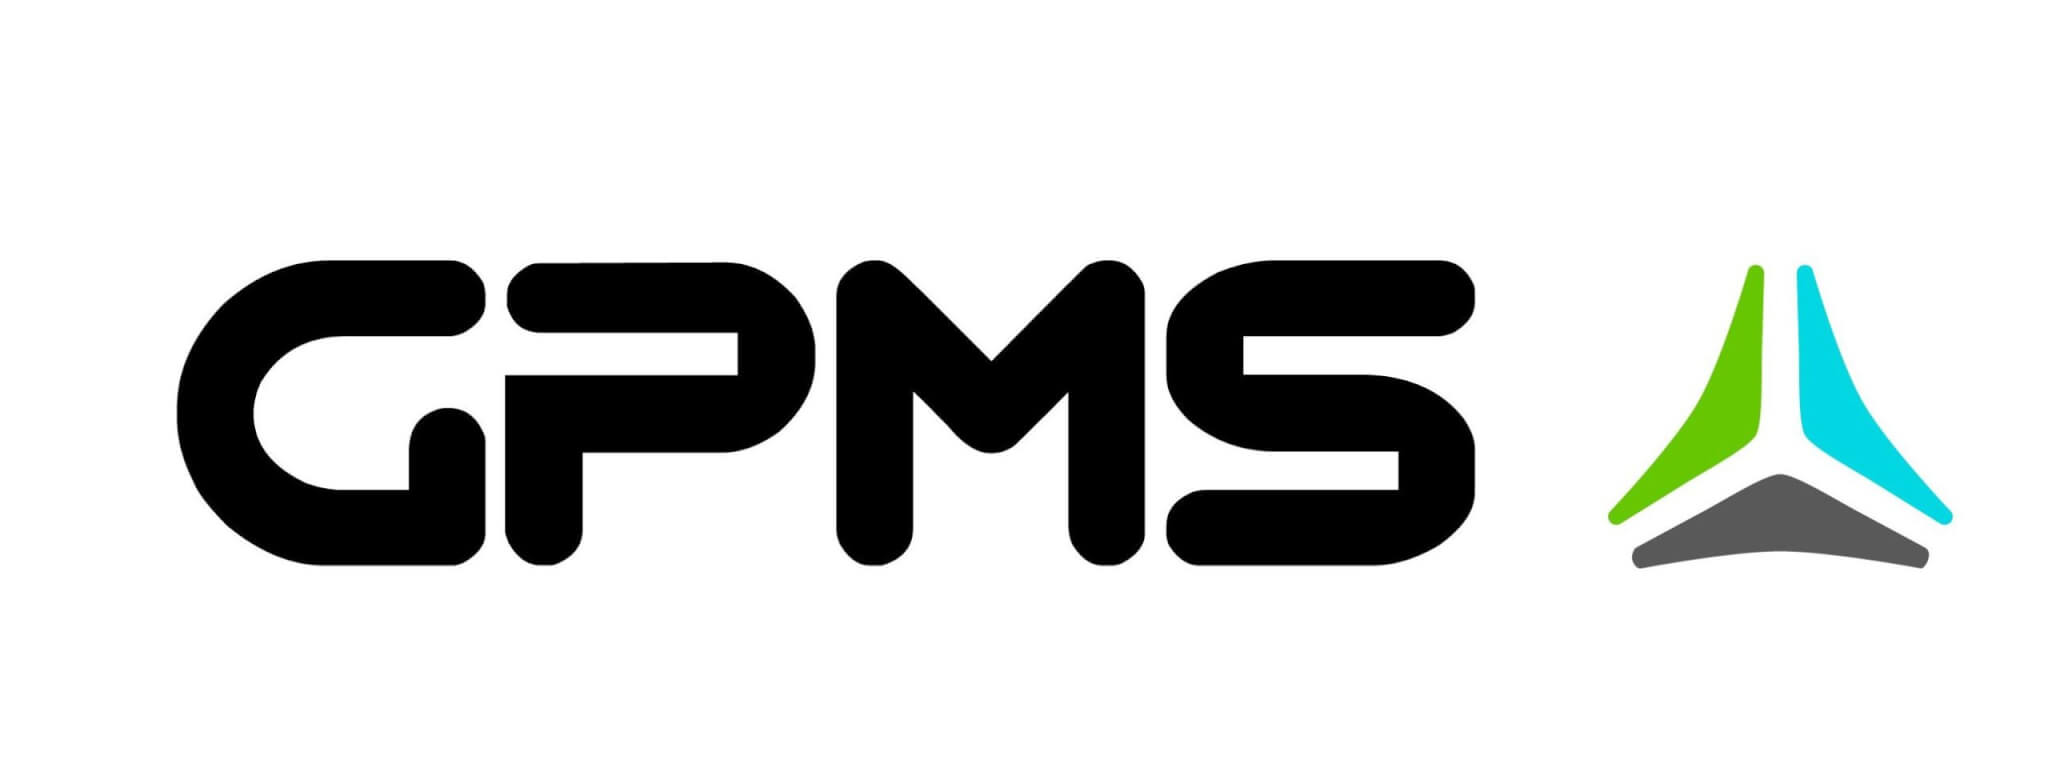 Press Release: GPMS Secures 5th Patent Related To Its Foresight Prognostic Health Monitoring System